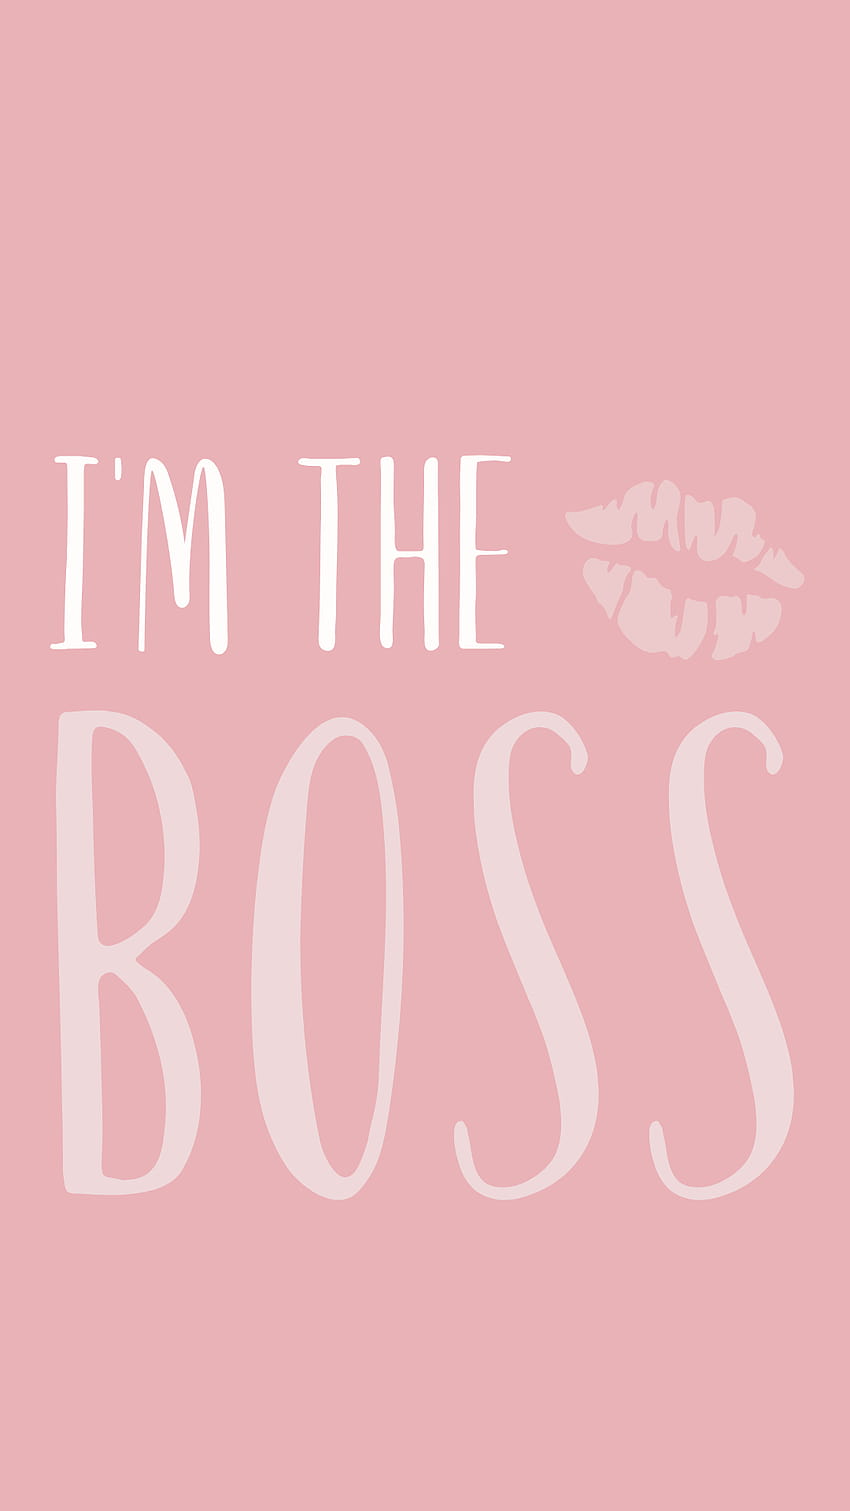 Pink aesthetic and Instagram story. I'm the boss, bossy HD phone wallpaper